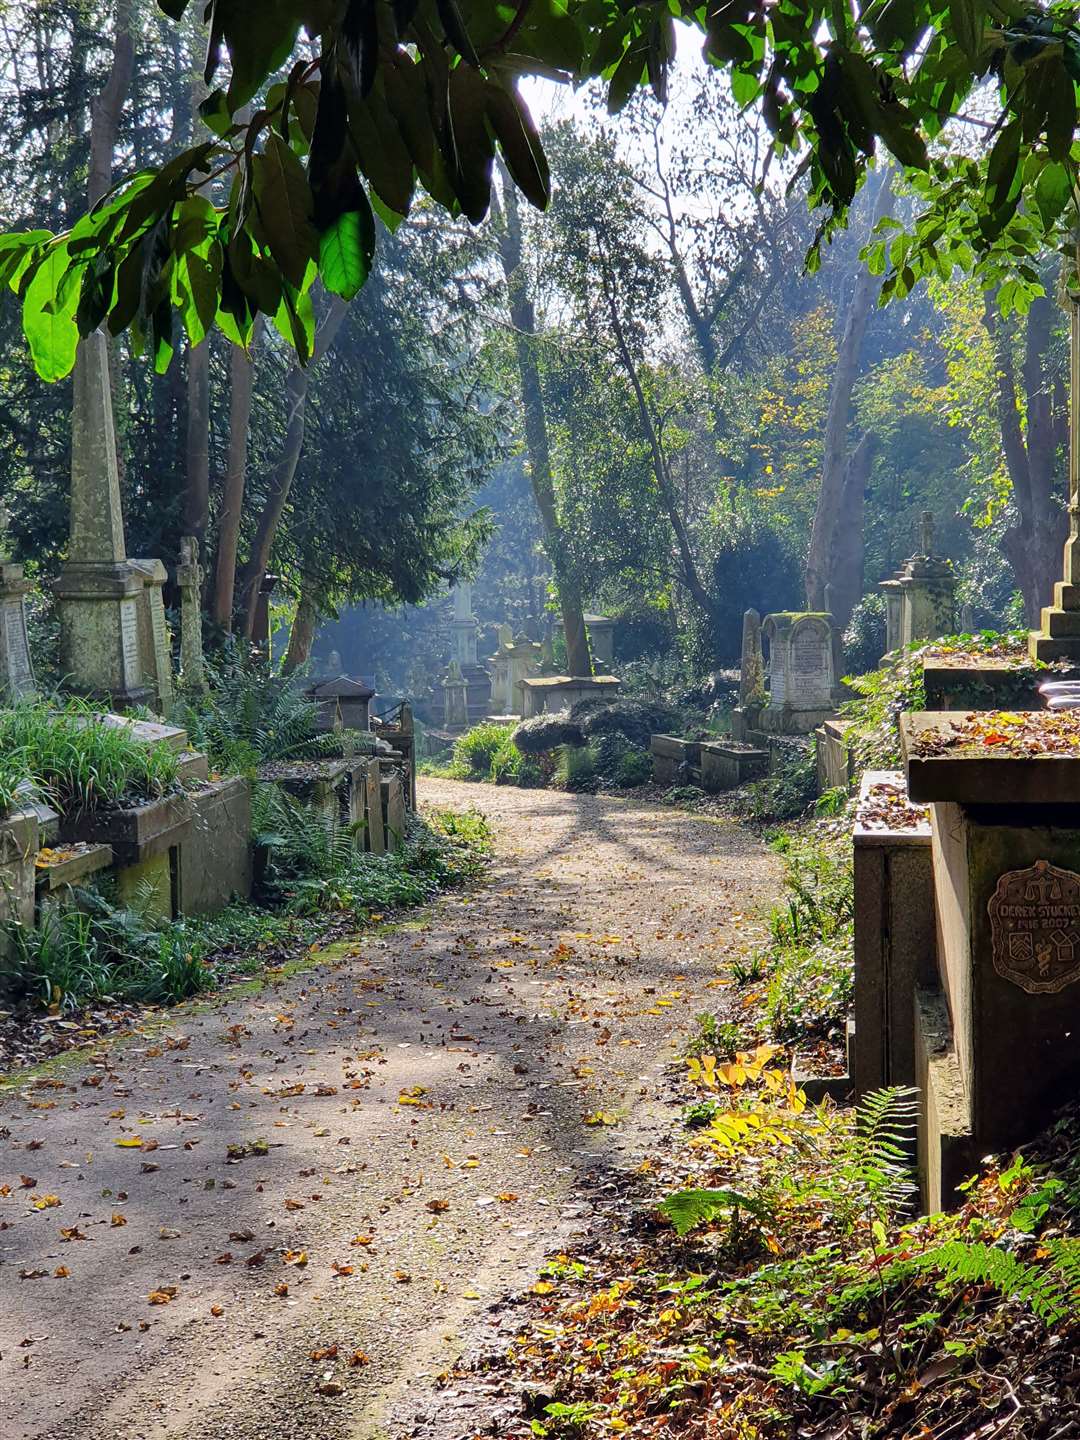 The competitions aim to give Highgate Cemetery a sustainable future (Friends of Highgate Cemetery Trust/PA)